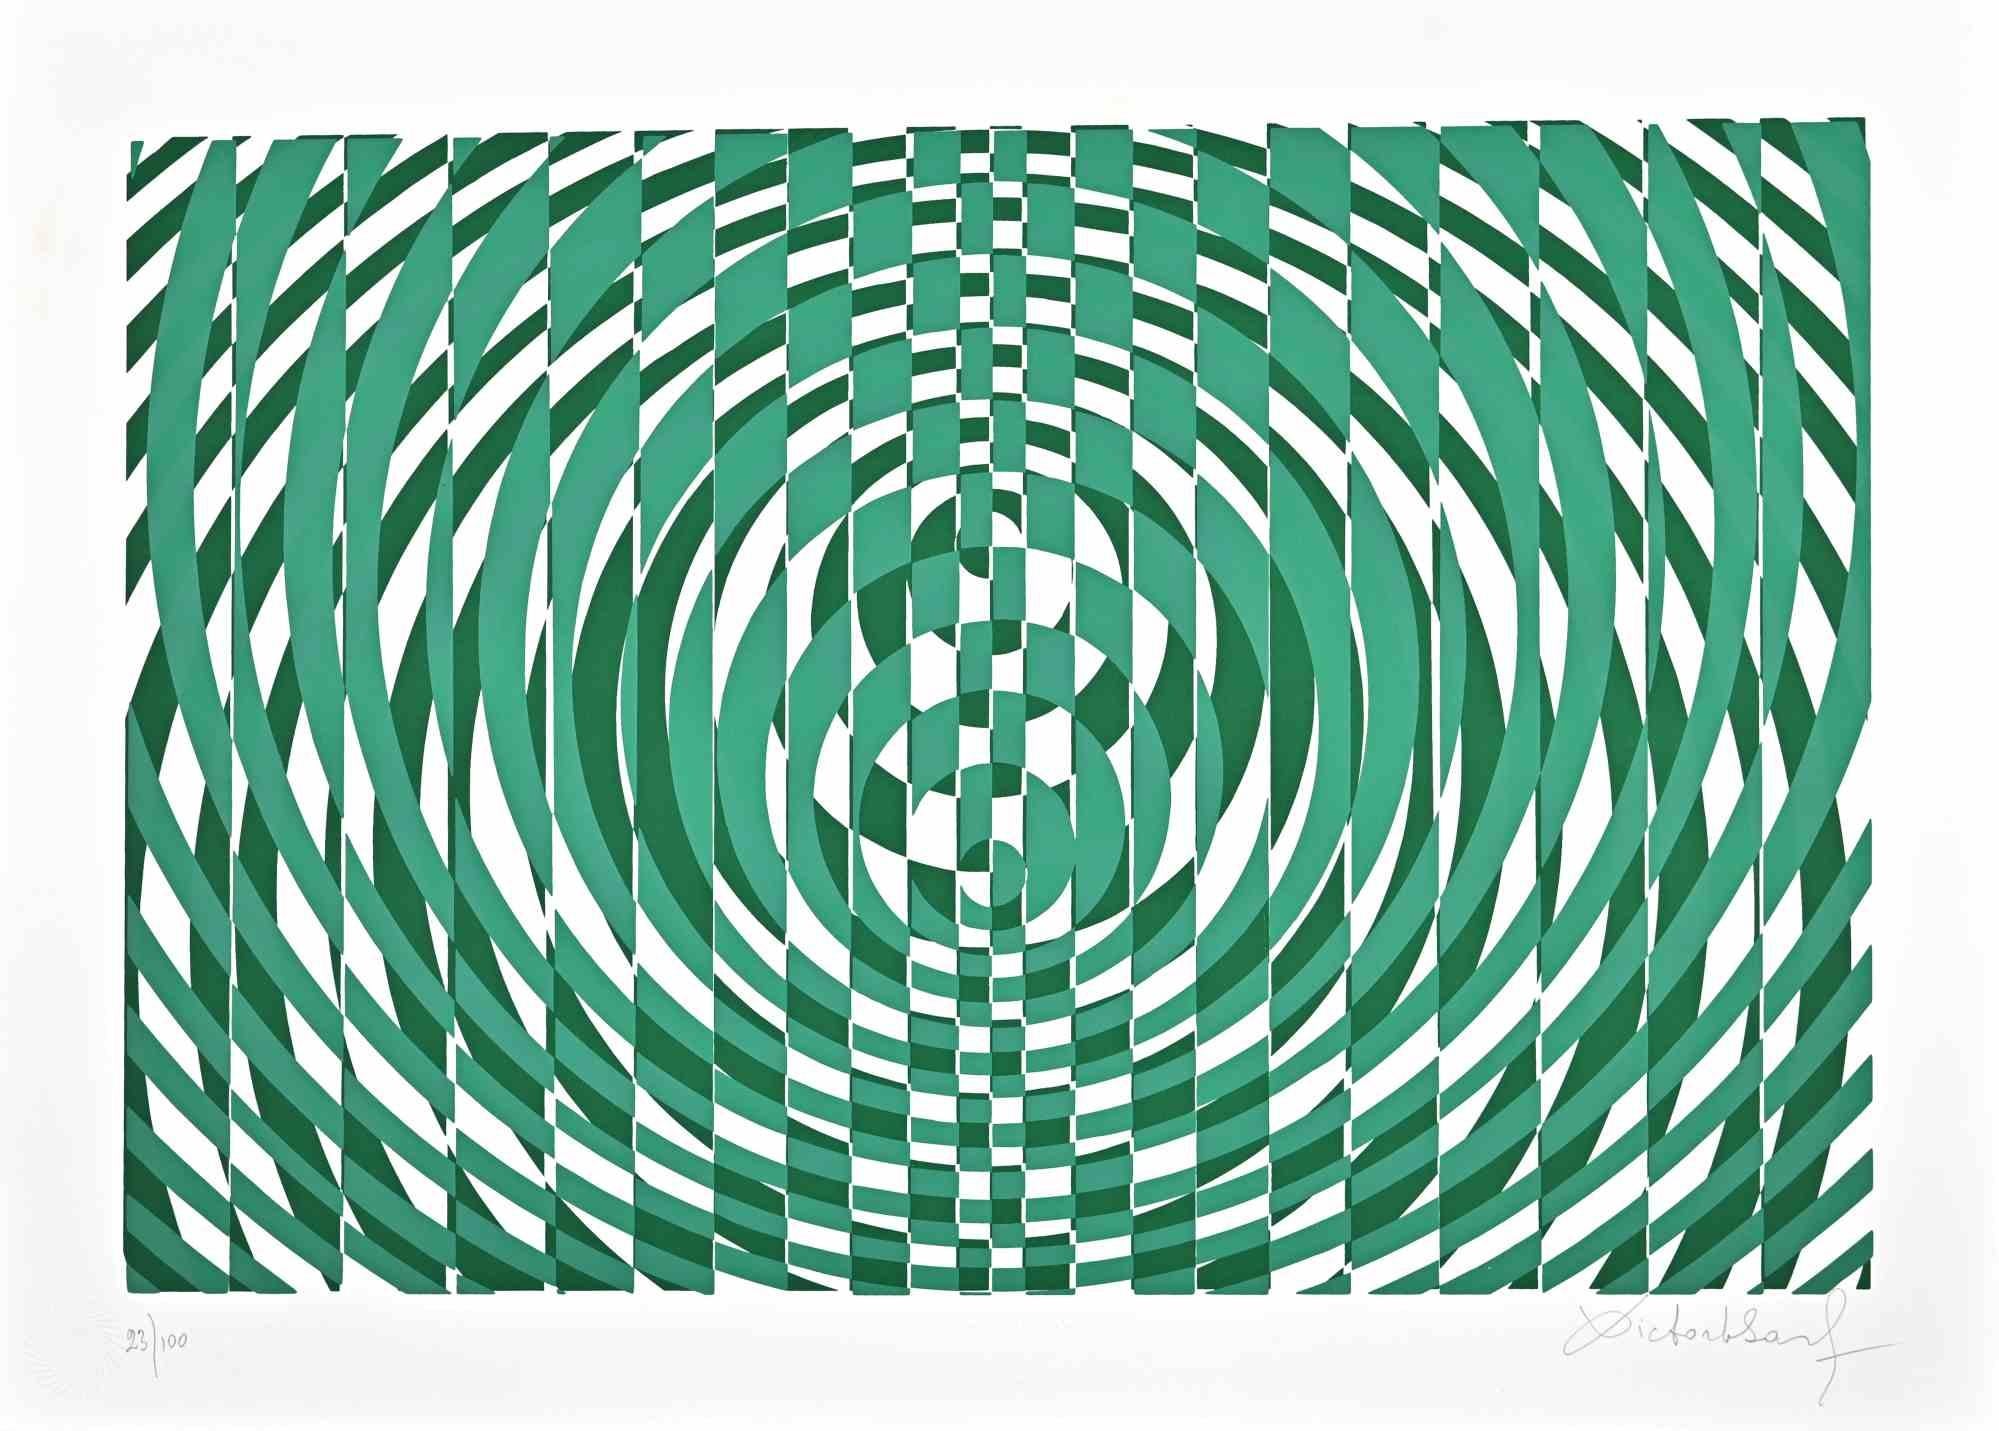 Abstract Green Composition is a Screen Print on Paper realized by Victor Debach in 1970s.

Limited edition of 100 copies numbered and signed by the artist with pencil on the lower margin.

Very good condition on a white cardboard.